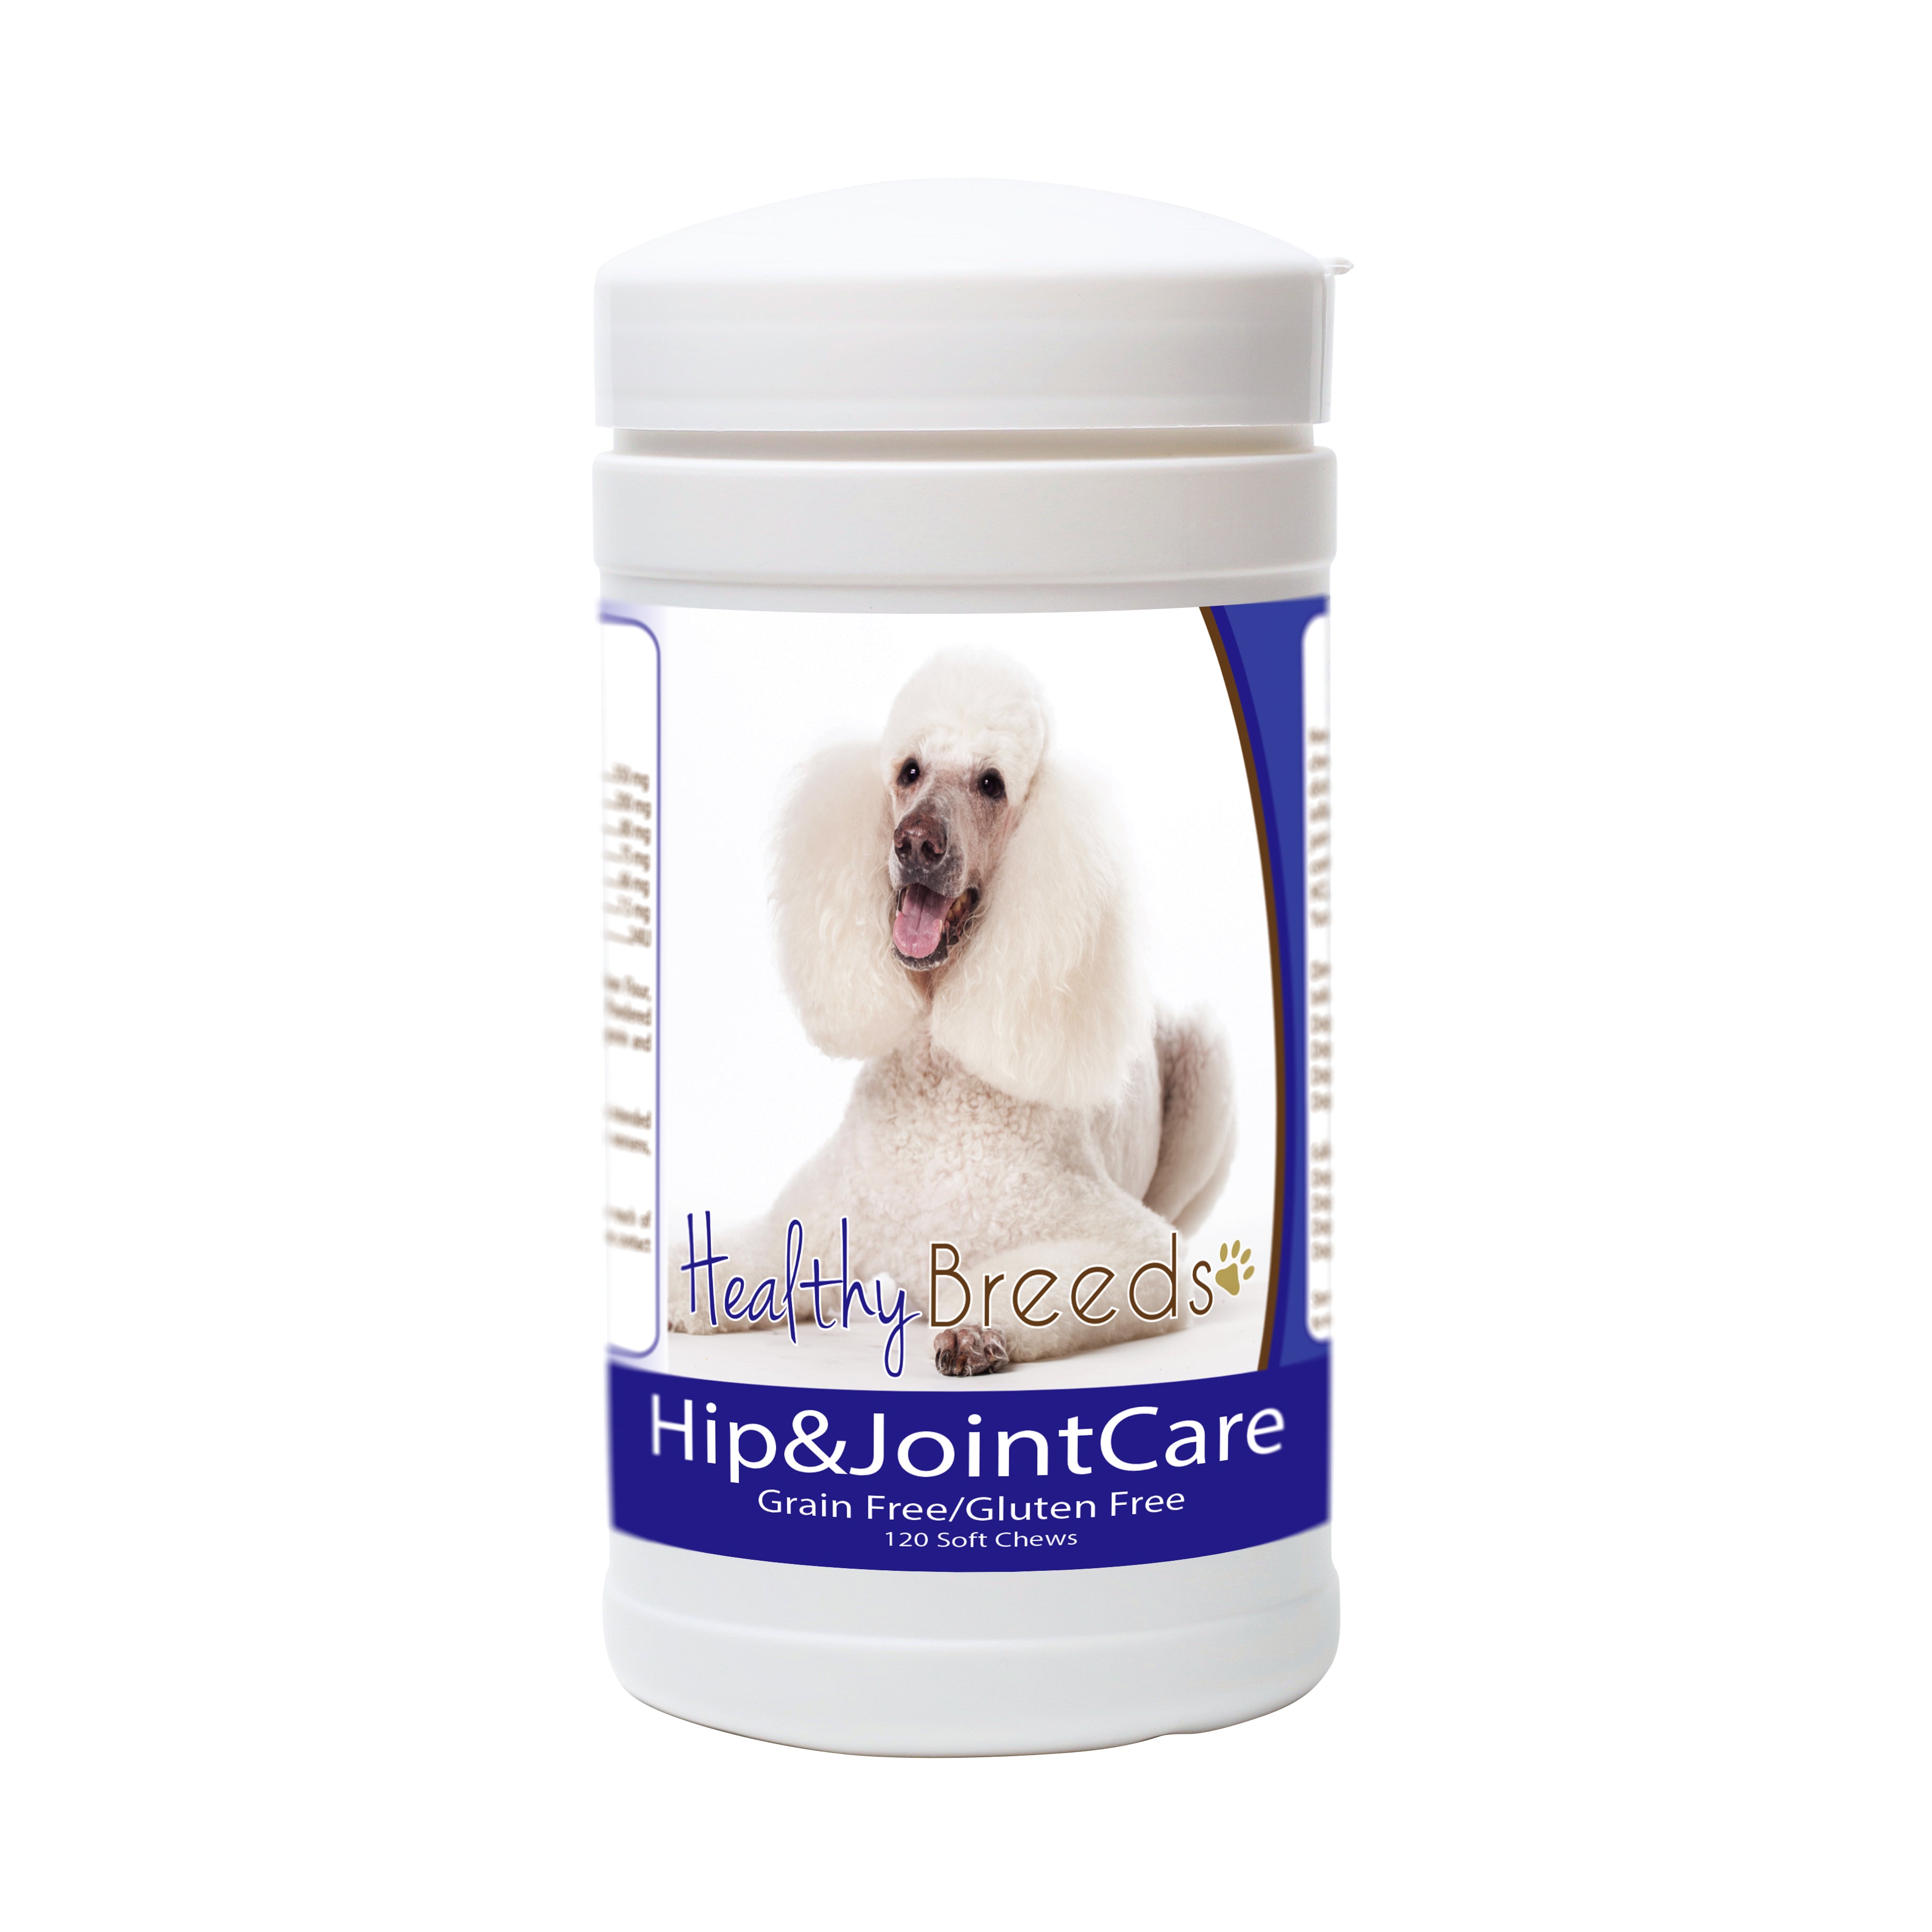 Healthy Breeds Hip & Joint Care Soft Chews - Poodle